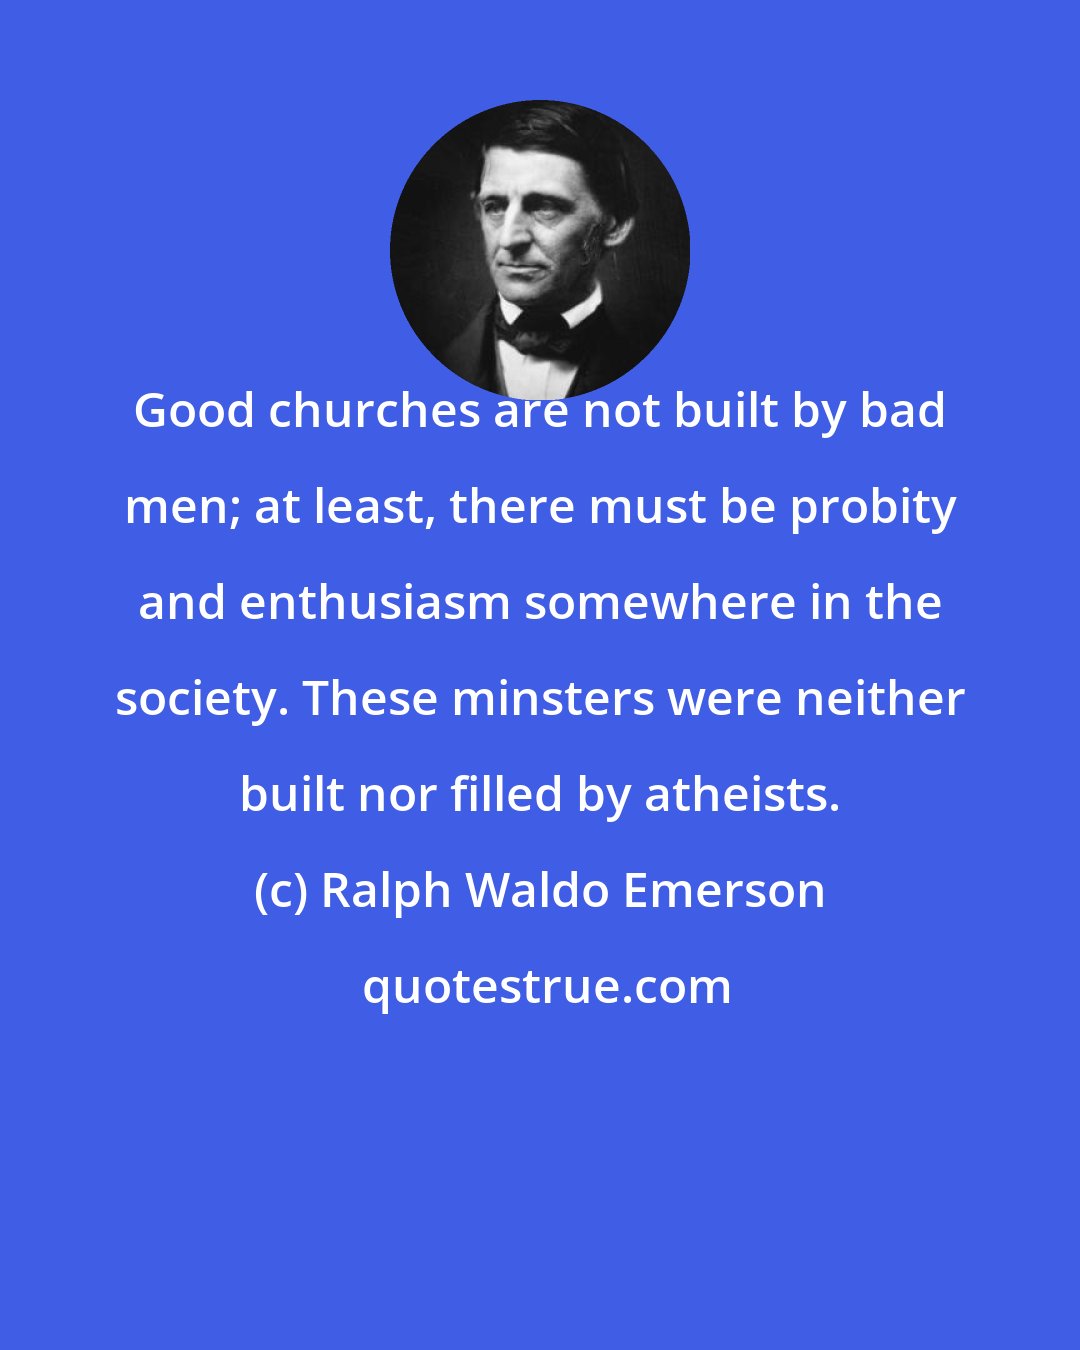 Ralph Waldo Emerson: Good churches are not built by bad men; at least, there must be probity and enthusiasm somewhere in the society. These minsters were neither built nor filled by atheists.